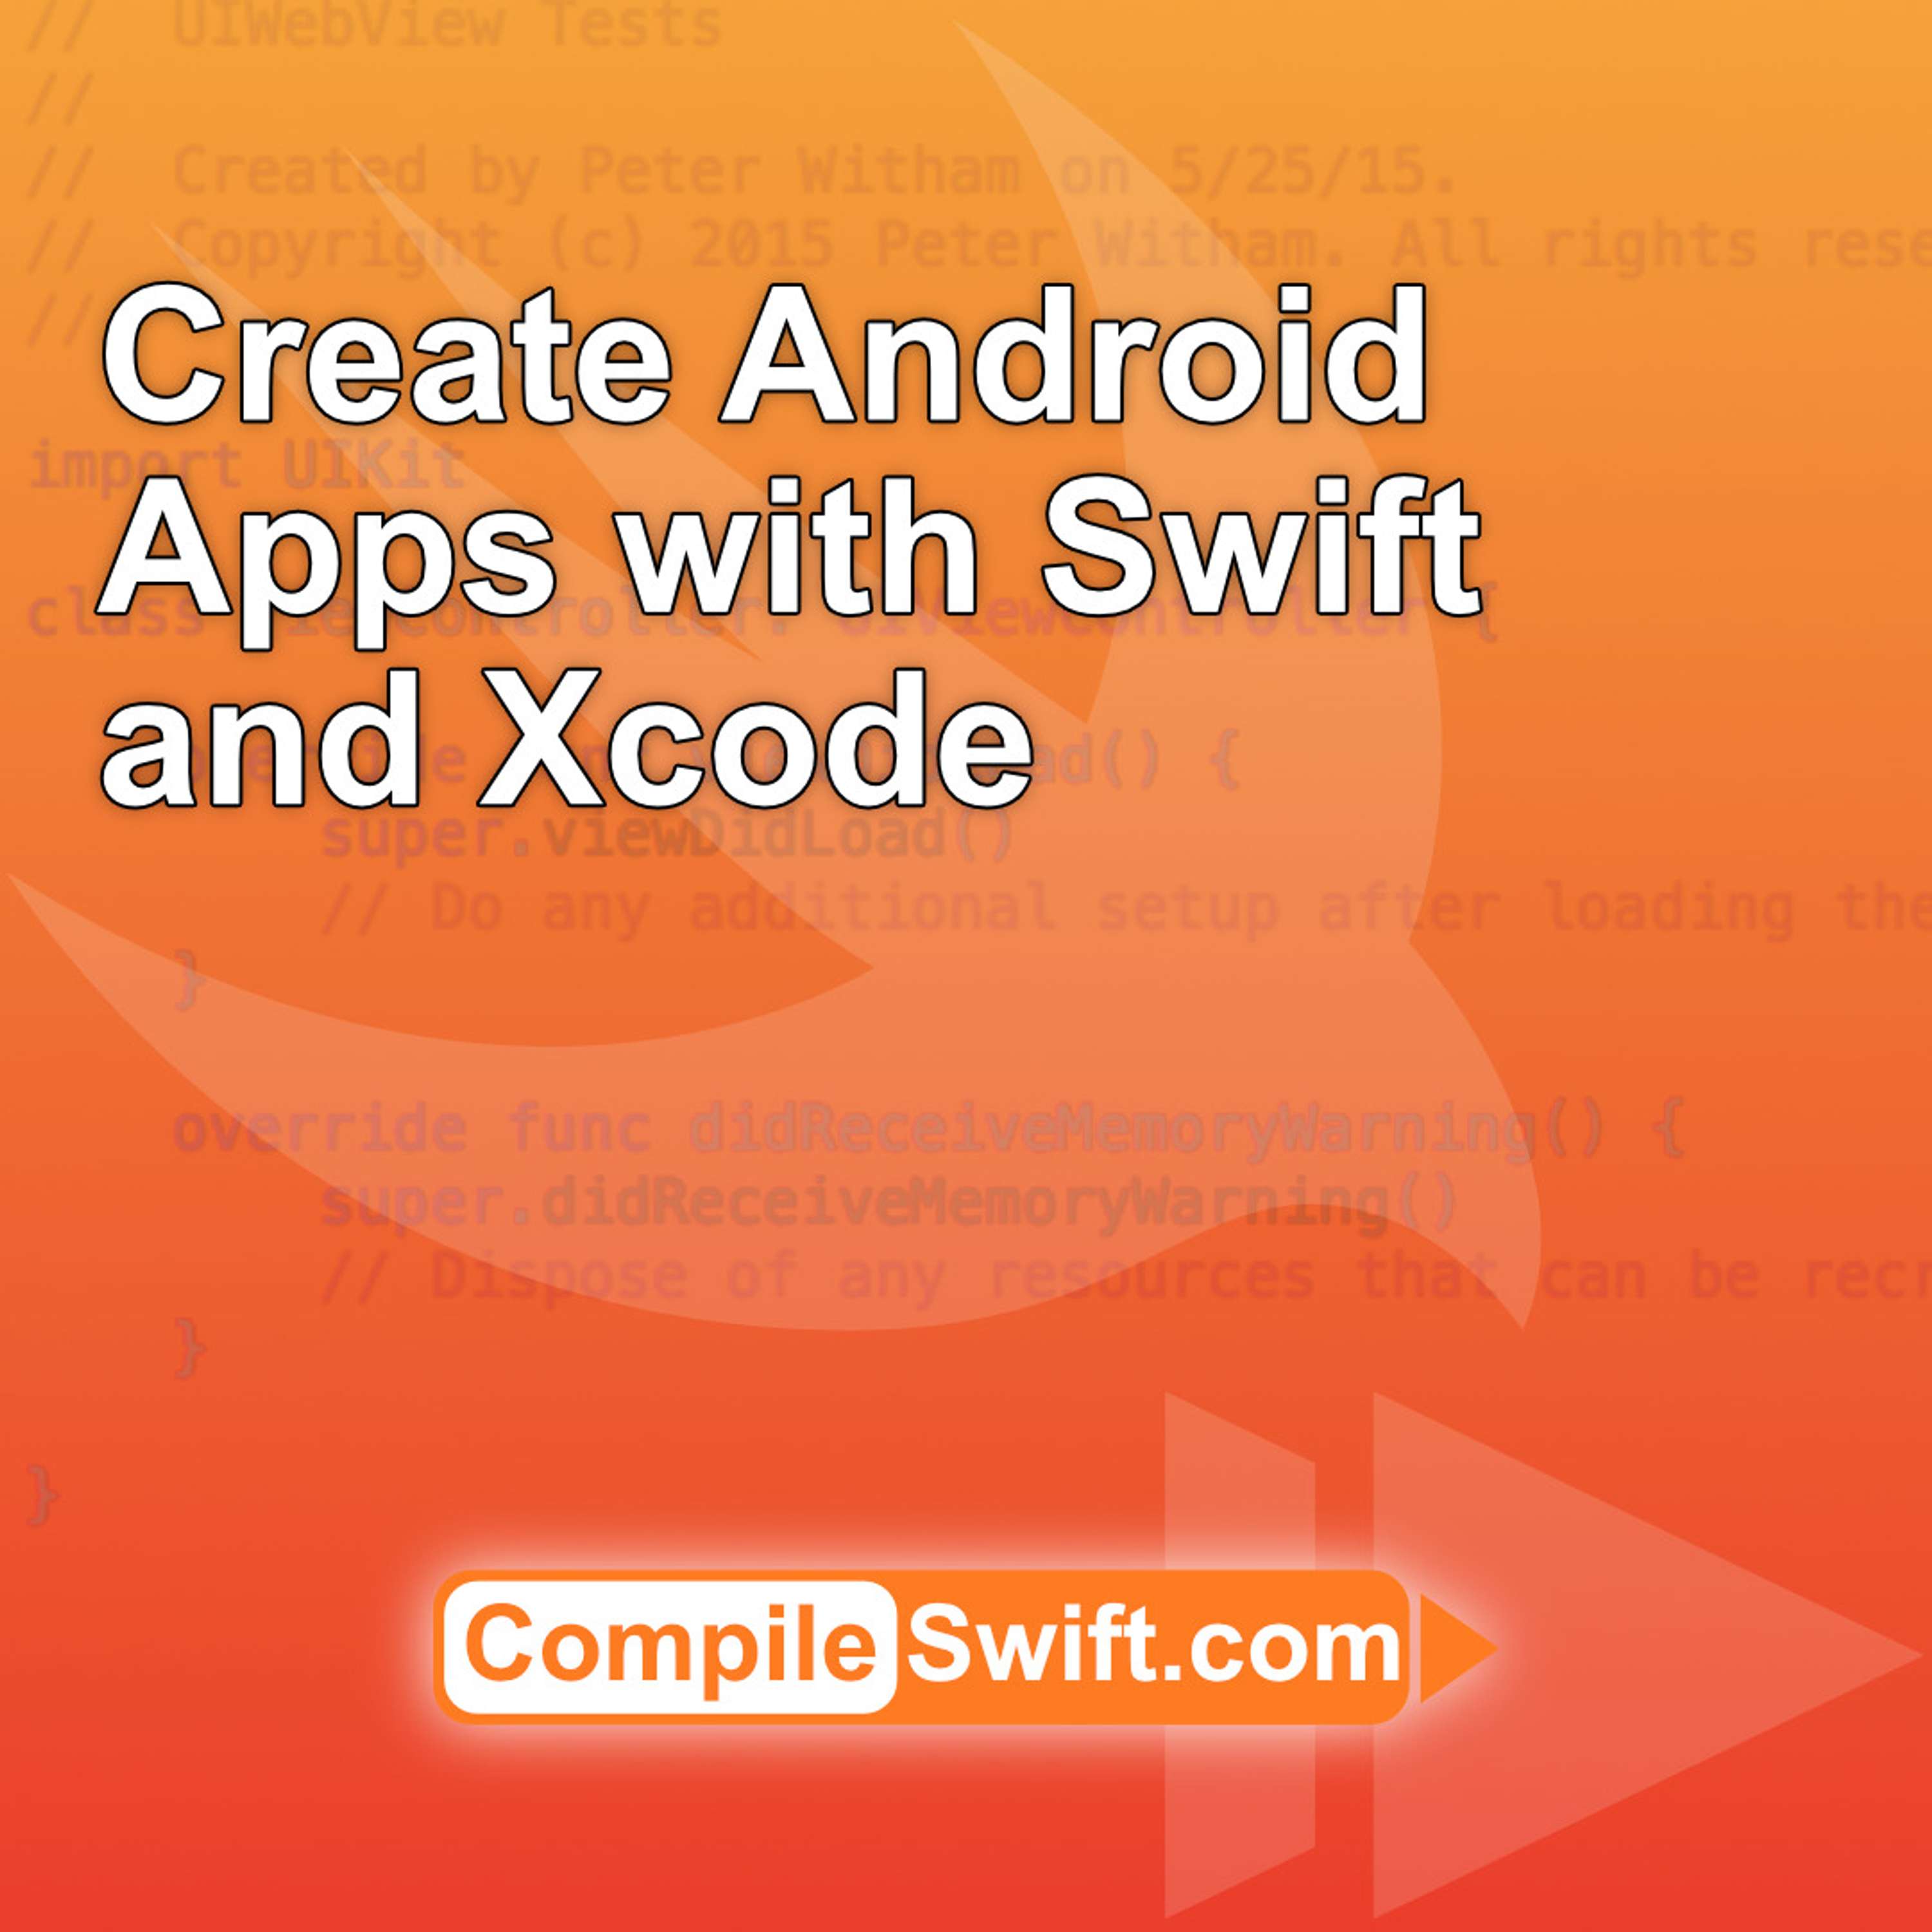 Create Android apps with Swift and Xcode